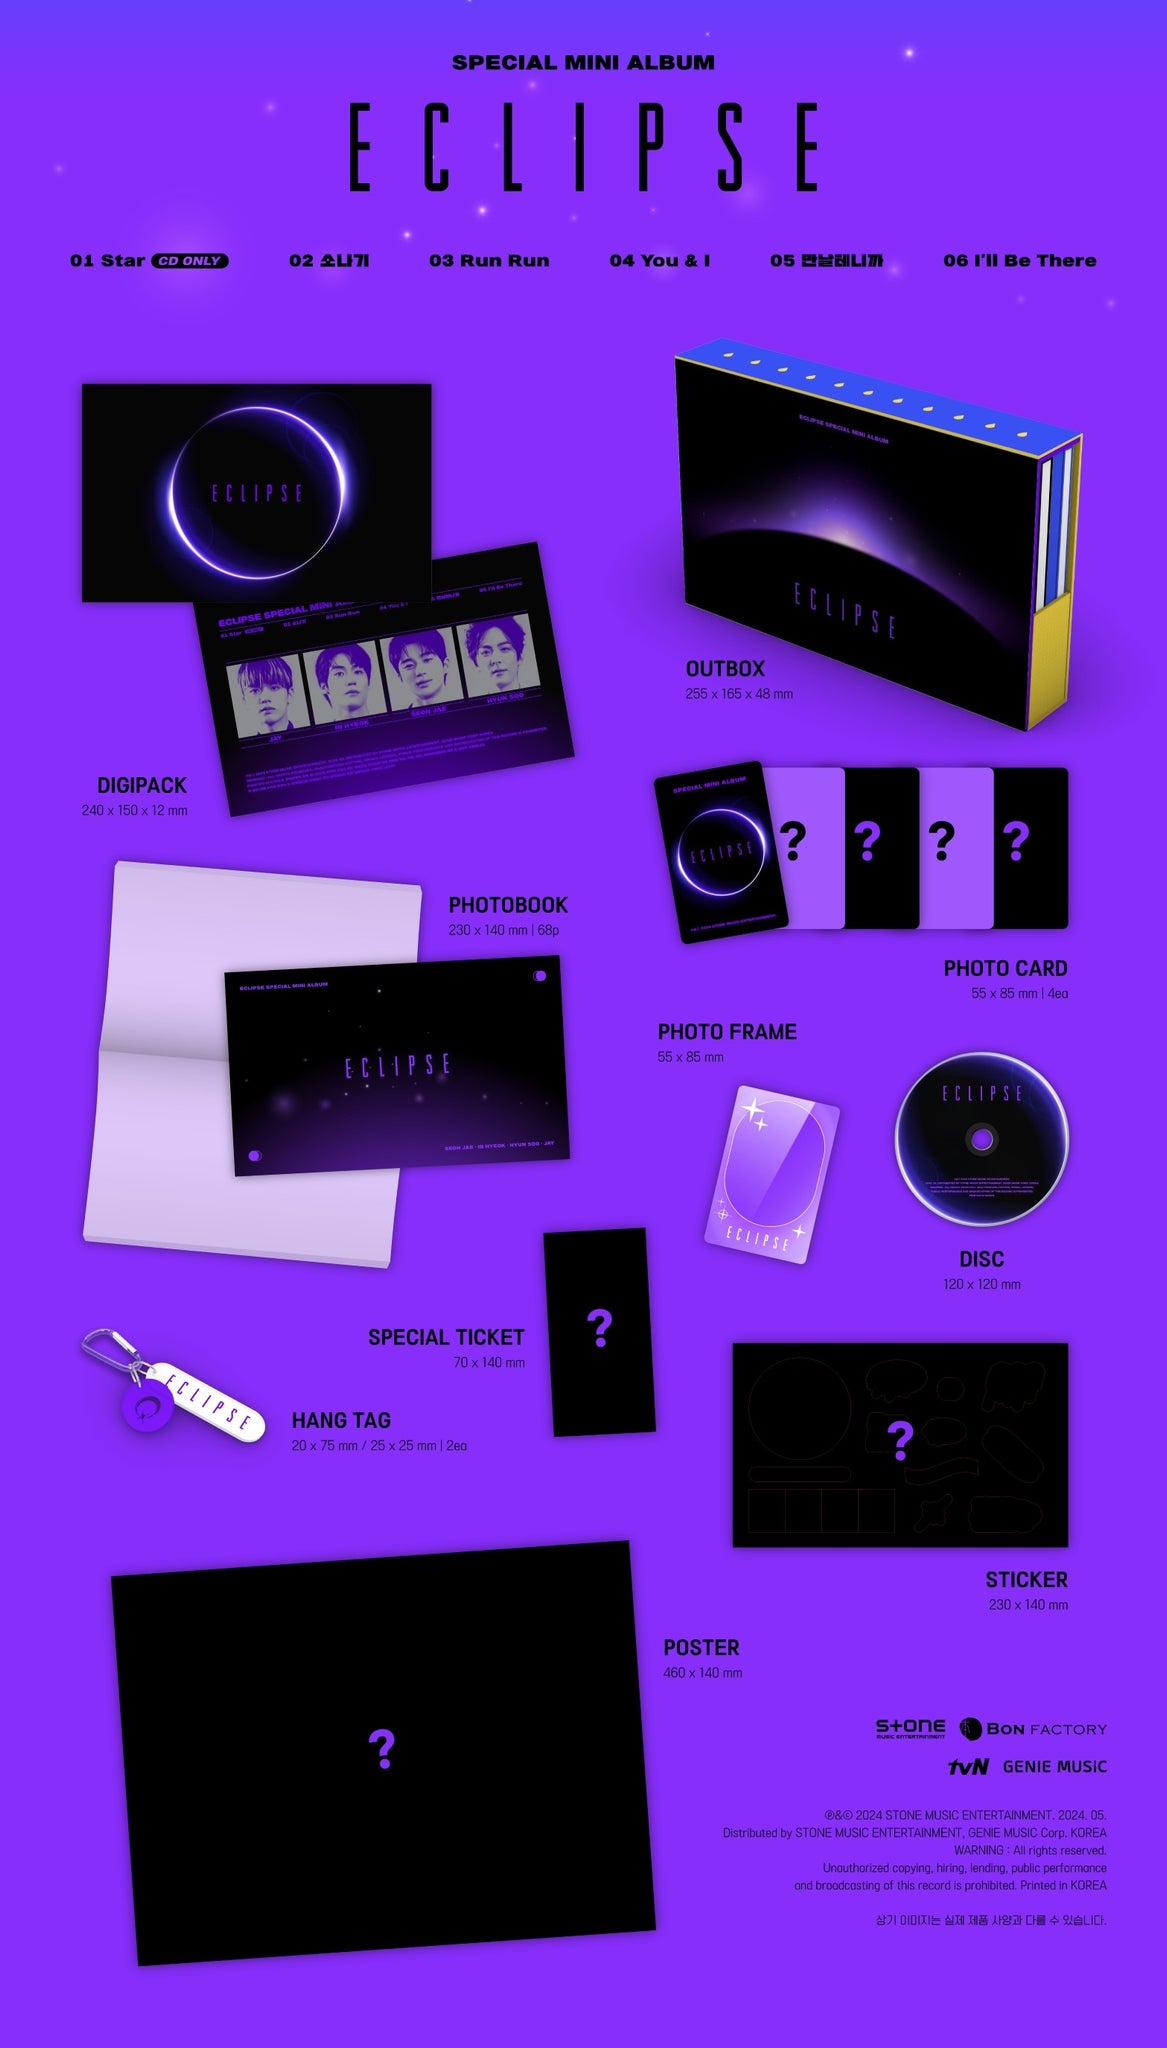 Lovely Runner OST - Special Mini Album ECLIPSE Inclusions: Photobook, Digipack, CD, Photocard Set, Photo Frame, Special Ticket, Hang Tag, Sticker, Poster